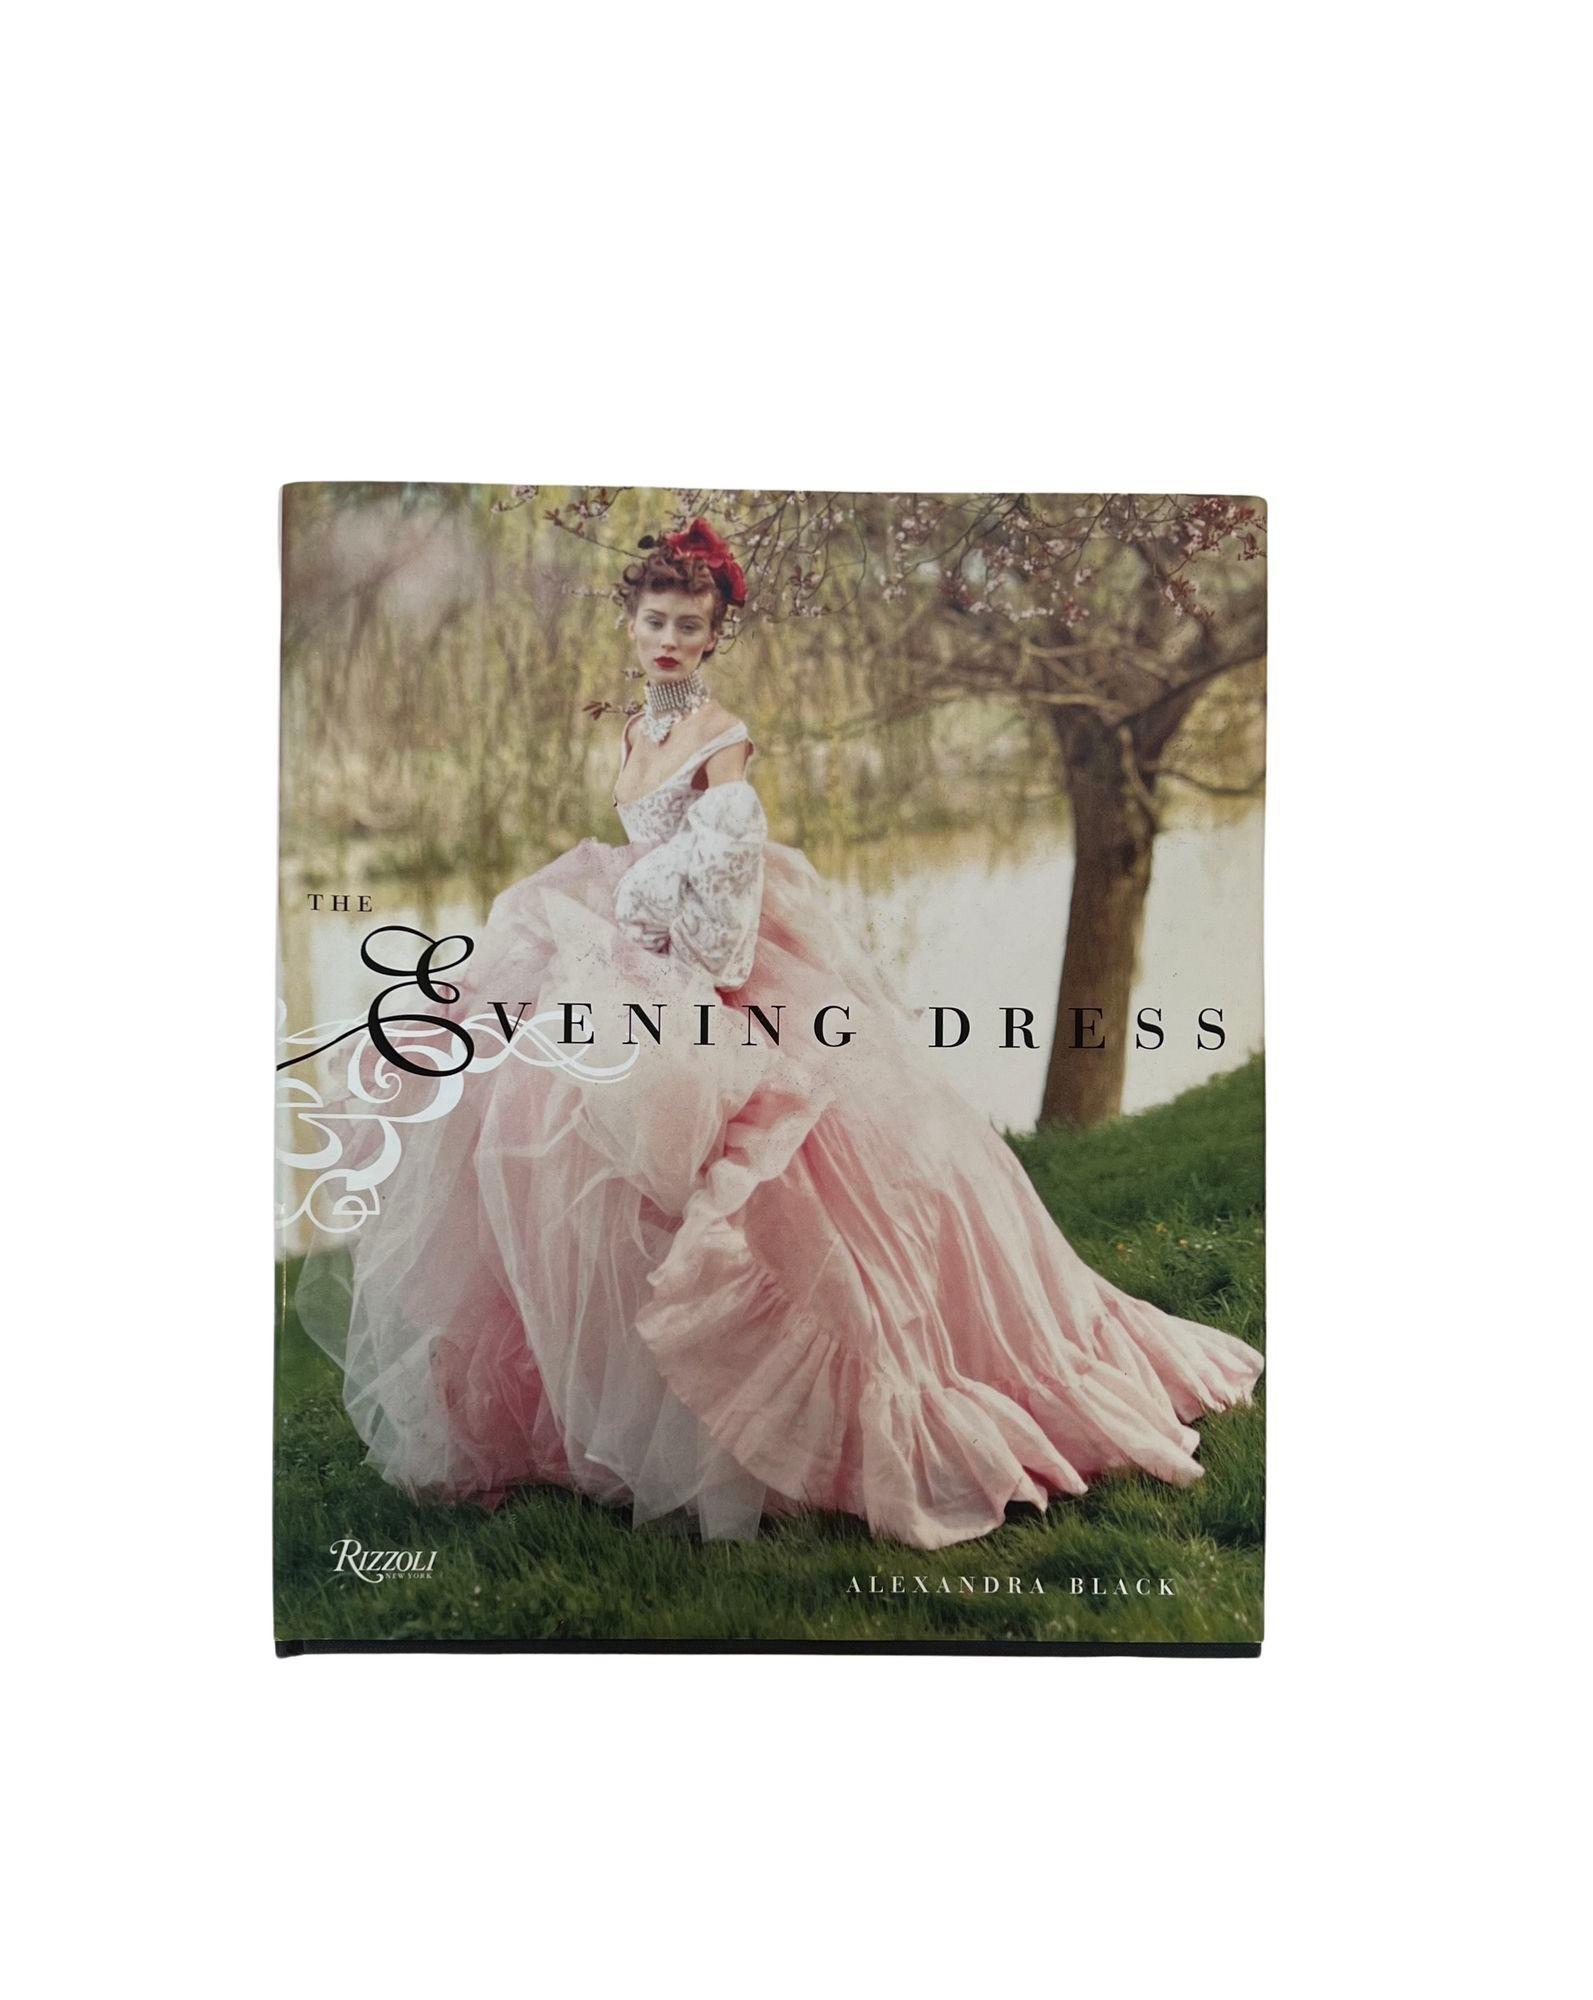 Evening Dress Hardcover Book First Edition of 2004, By Alexandra Black is a tribute to the most elegant form of the fashion arts chronicles.The book is an entire journey through the evution of glamorous evening attire from ancient times to the